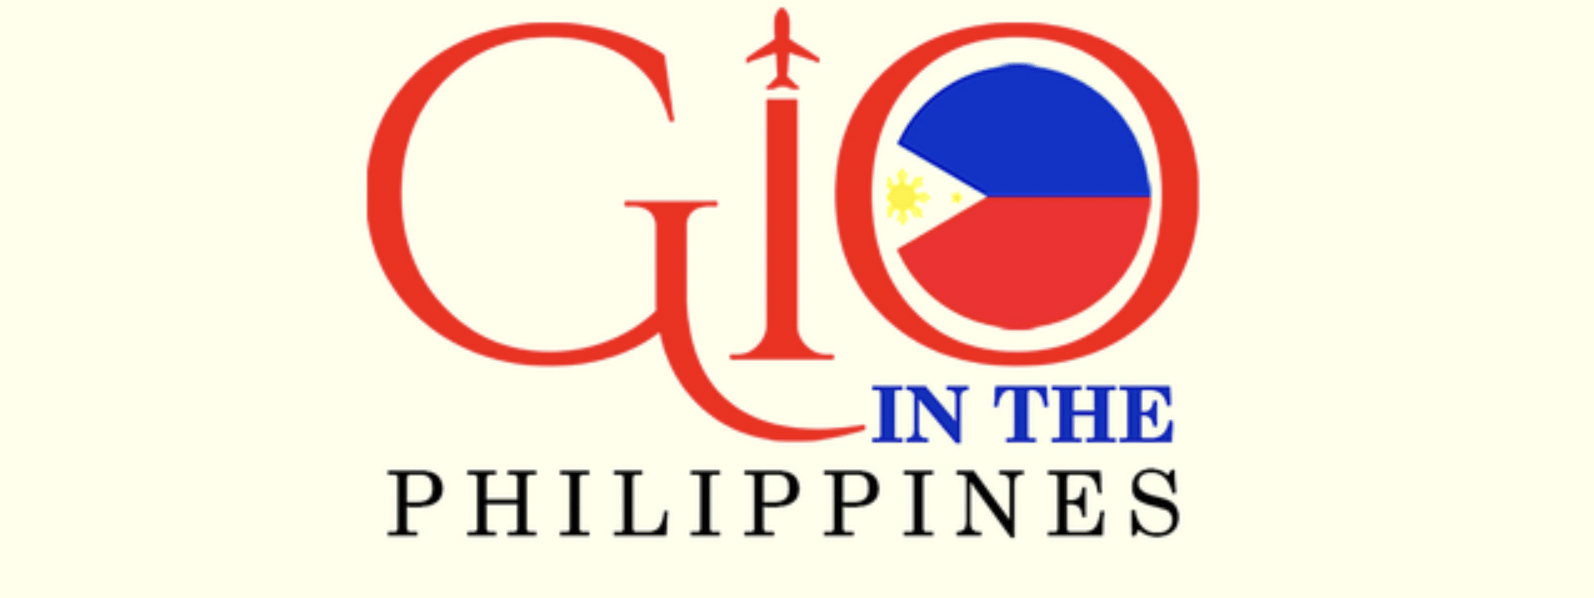 Gio in the Philippines Cover Photo